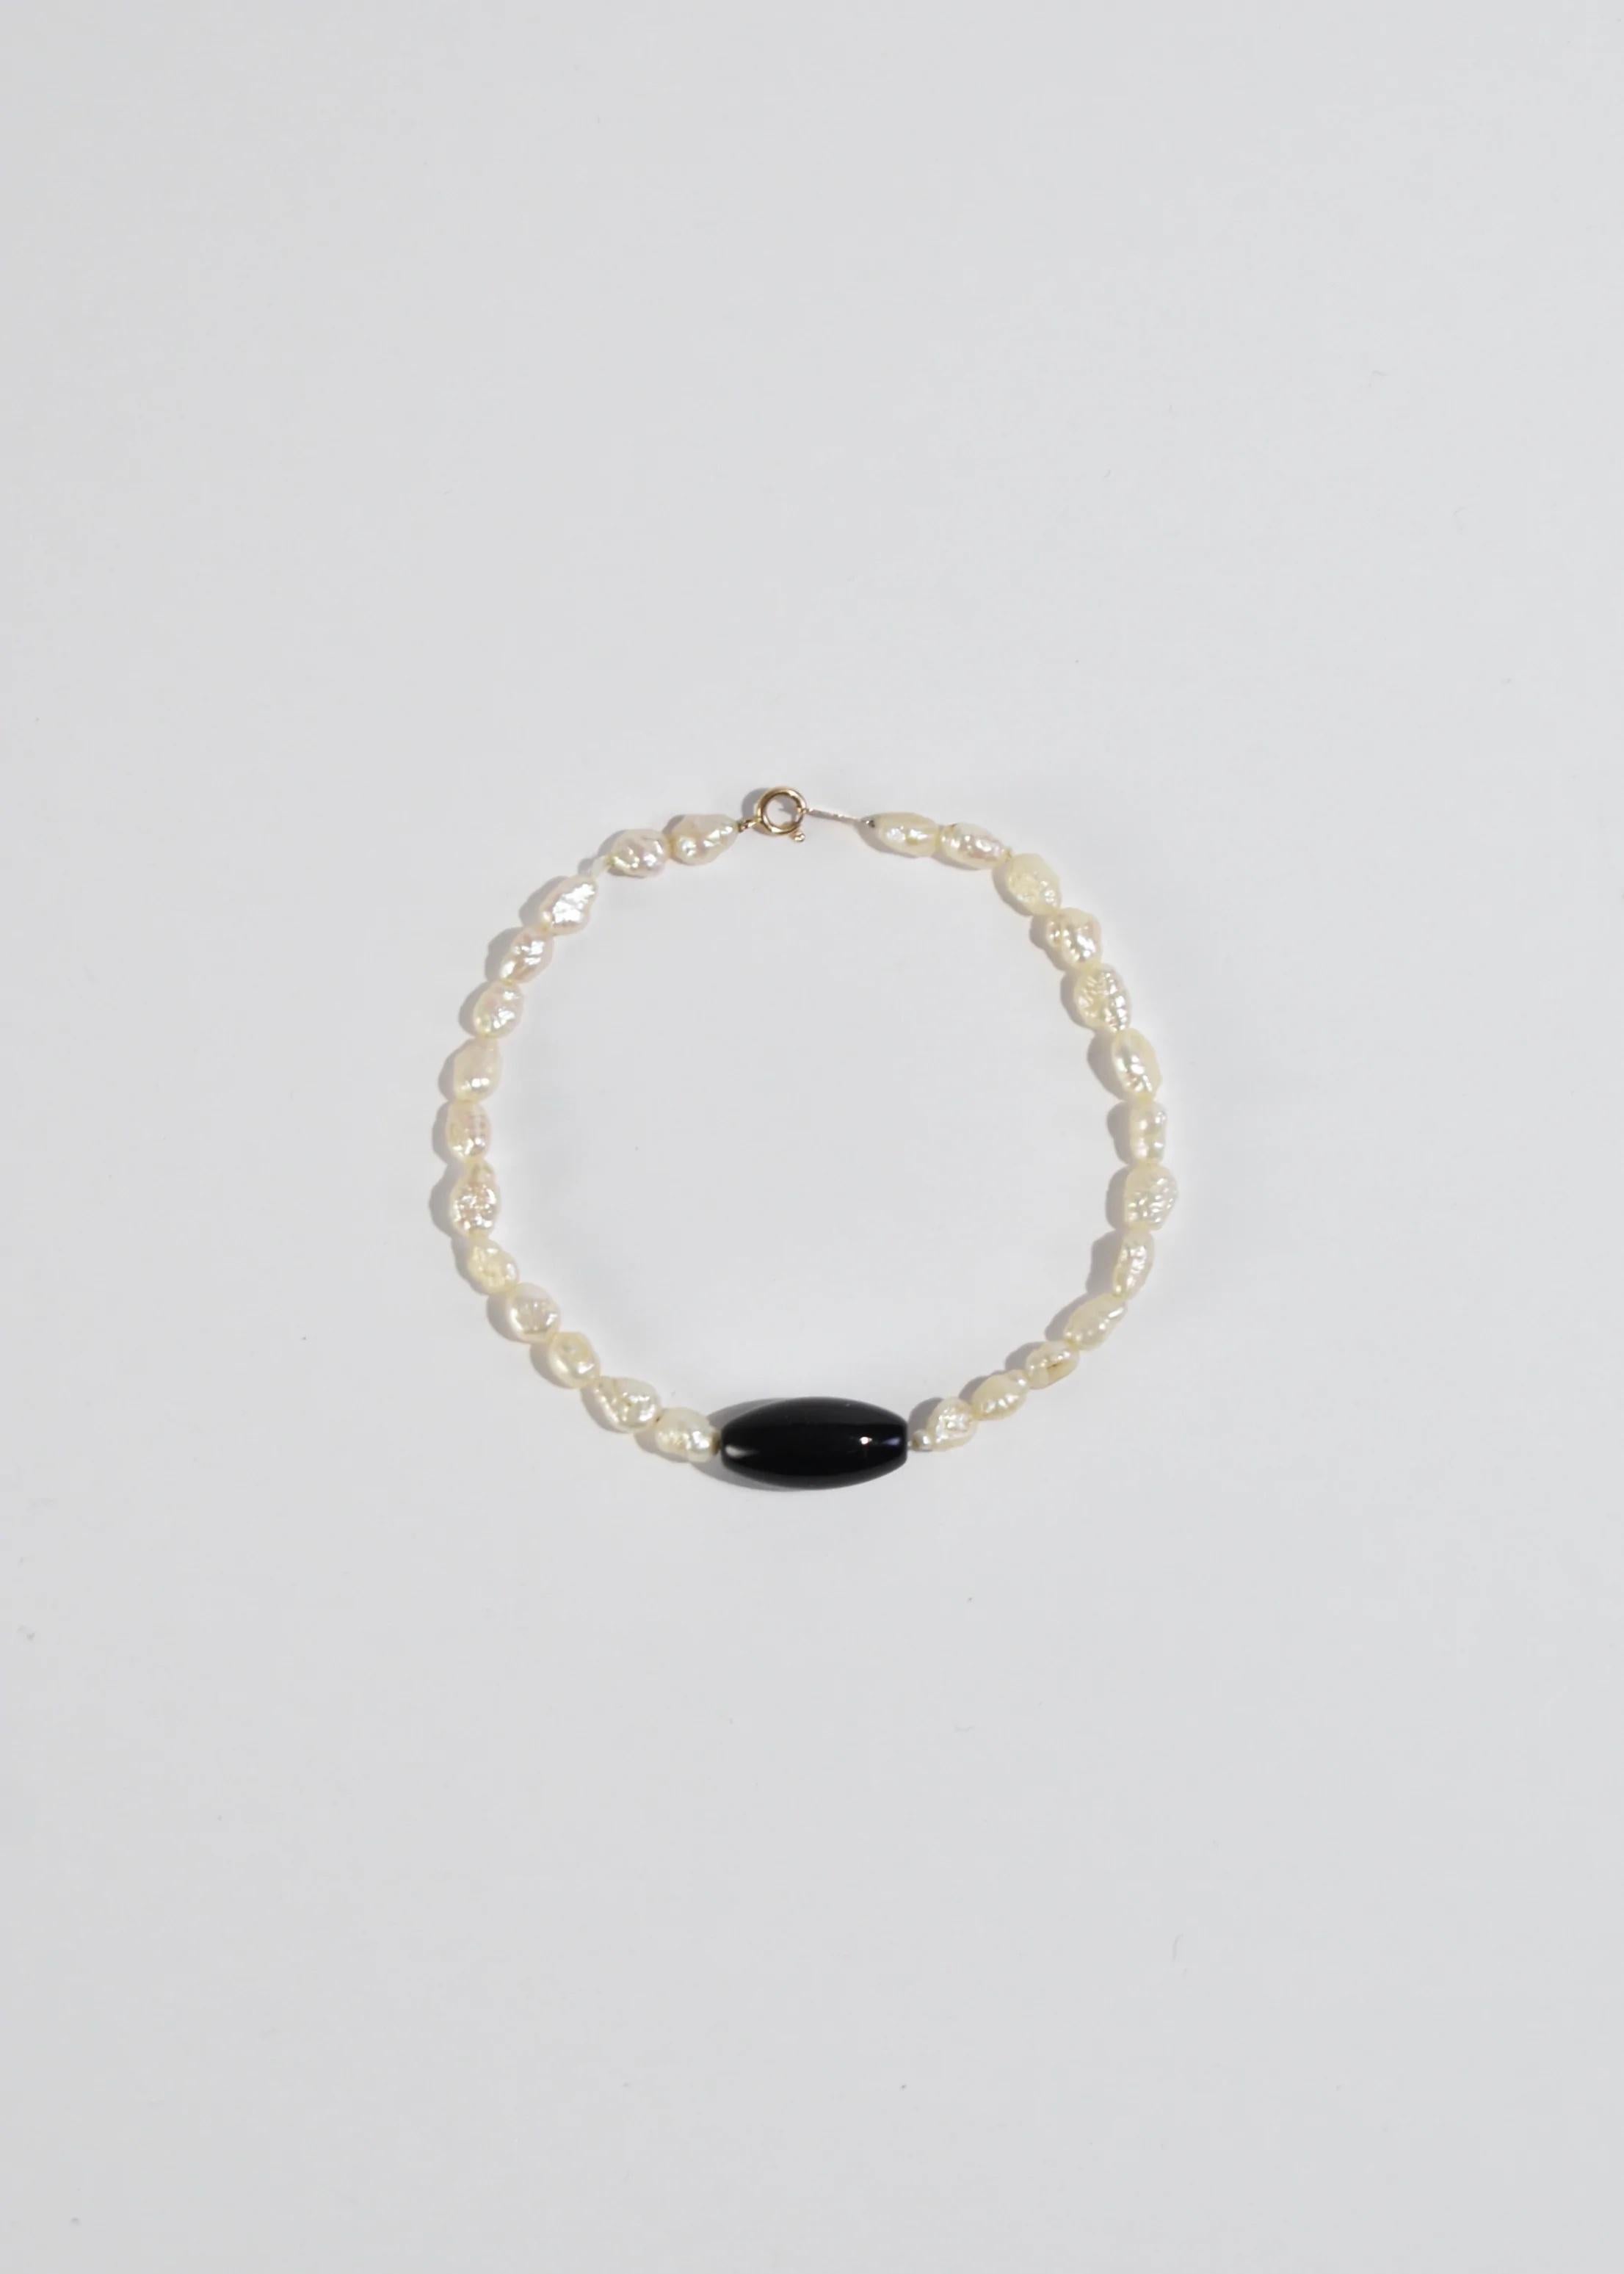 Vintage petite freshwater pearl bracelet with onyx stone detail and gold clasp closure. Stamped ﻿14k﻿.

Material: 14k gold, pearl, onyx.